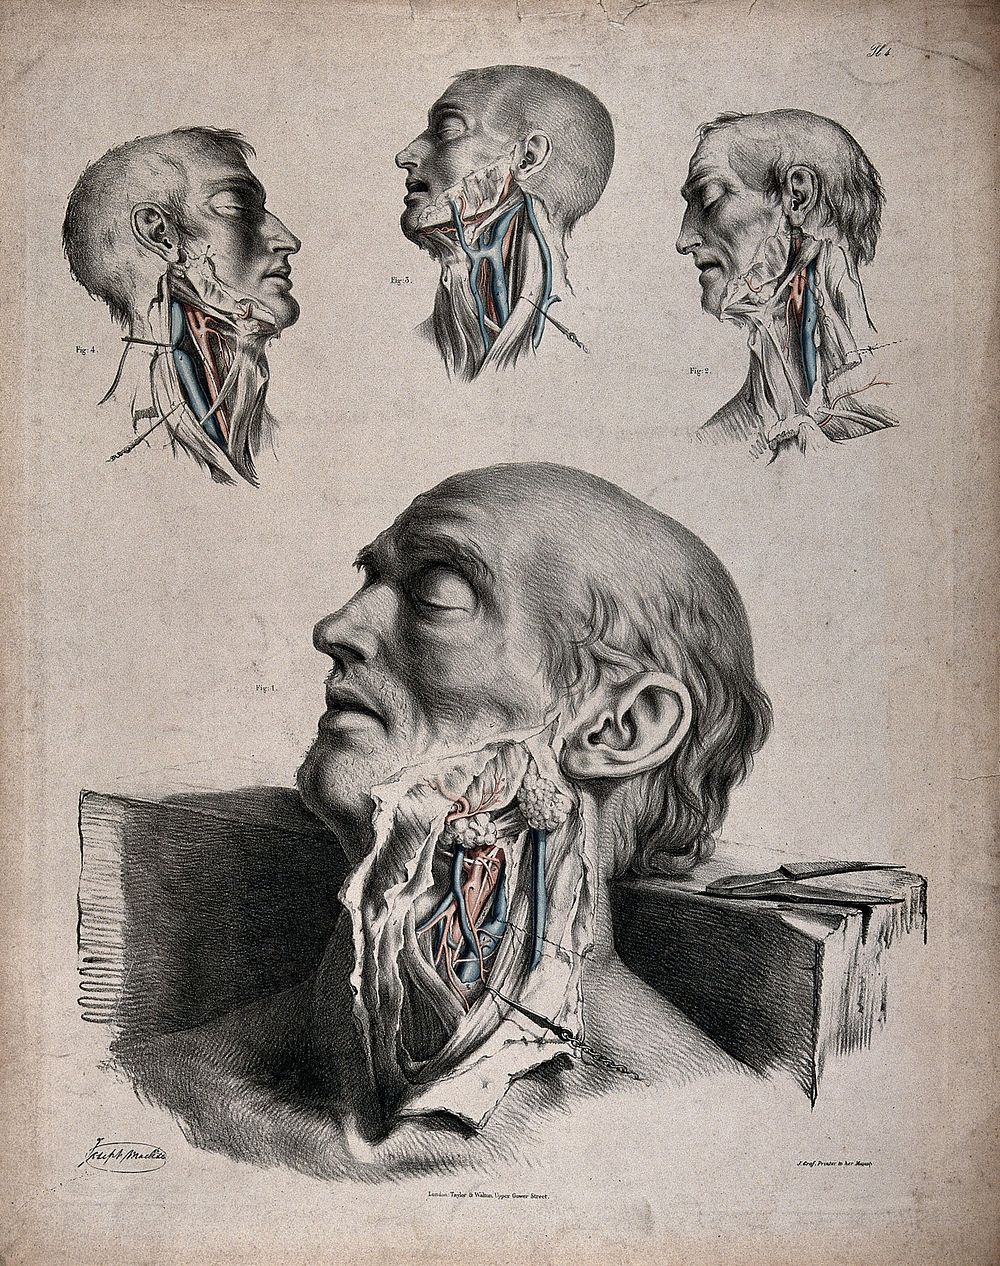 The circulatory system: dissections of the neck of a man, with arteries, blood vessels and veins indicated in red and blue.…